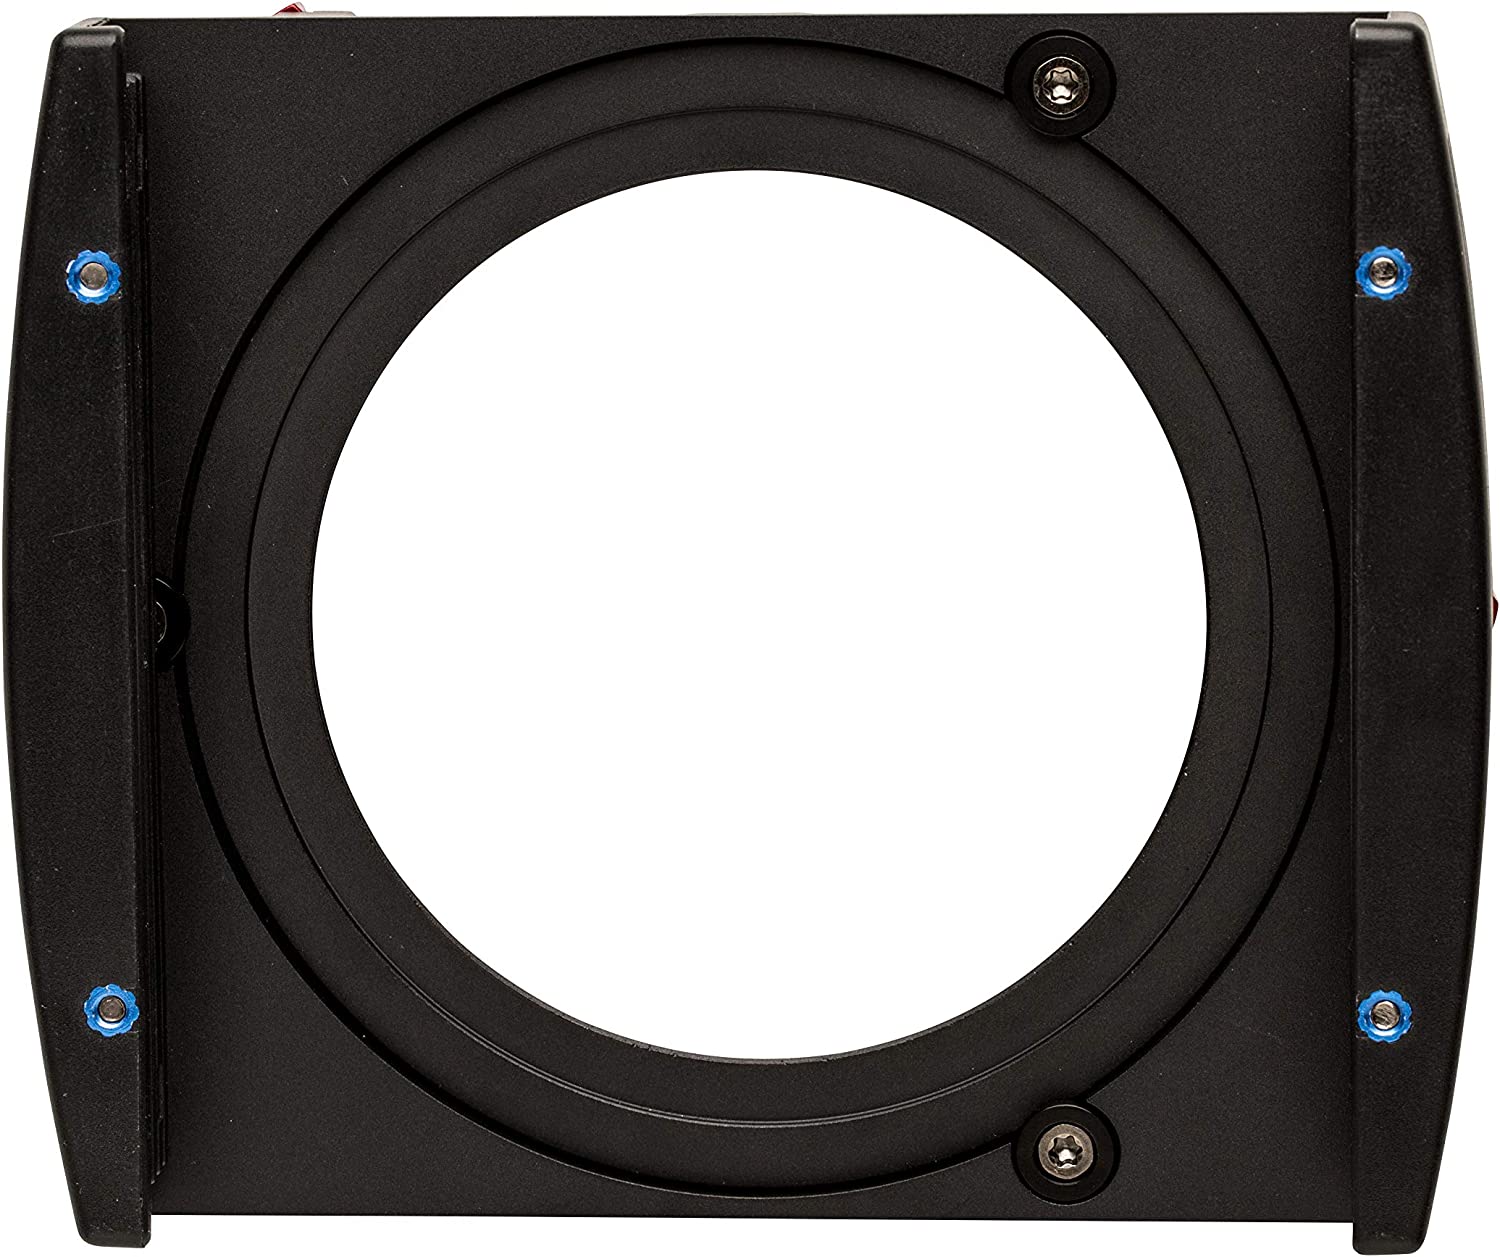 Benro Master Filter Holder Kit 100mm FH100M2B (CPL 95mm) suitable for wide zooms